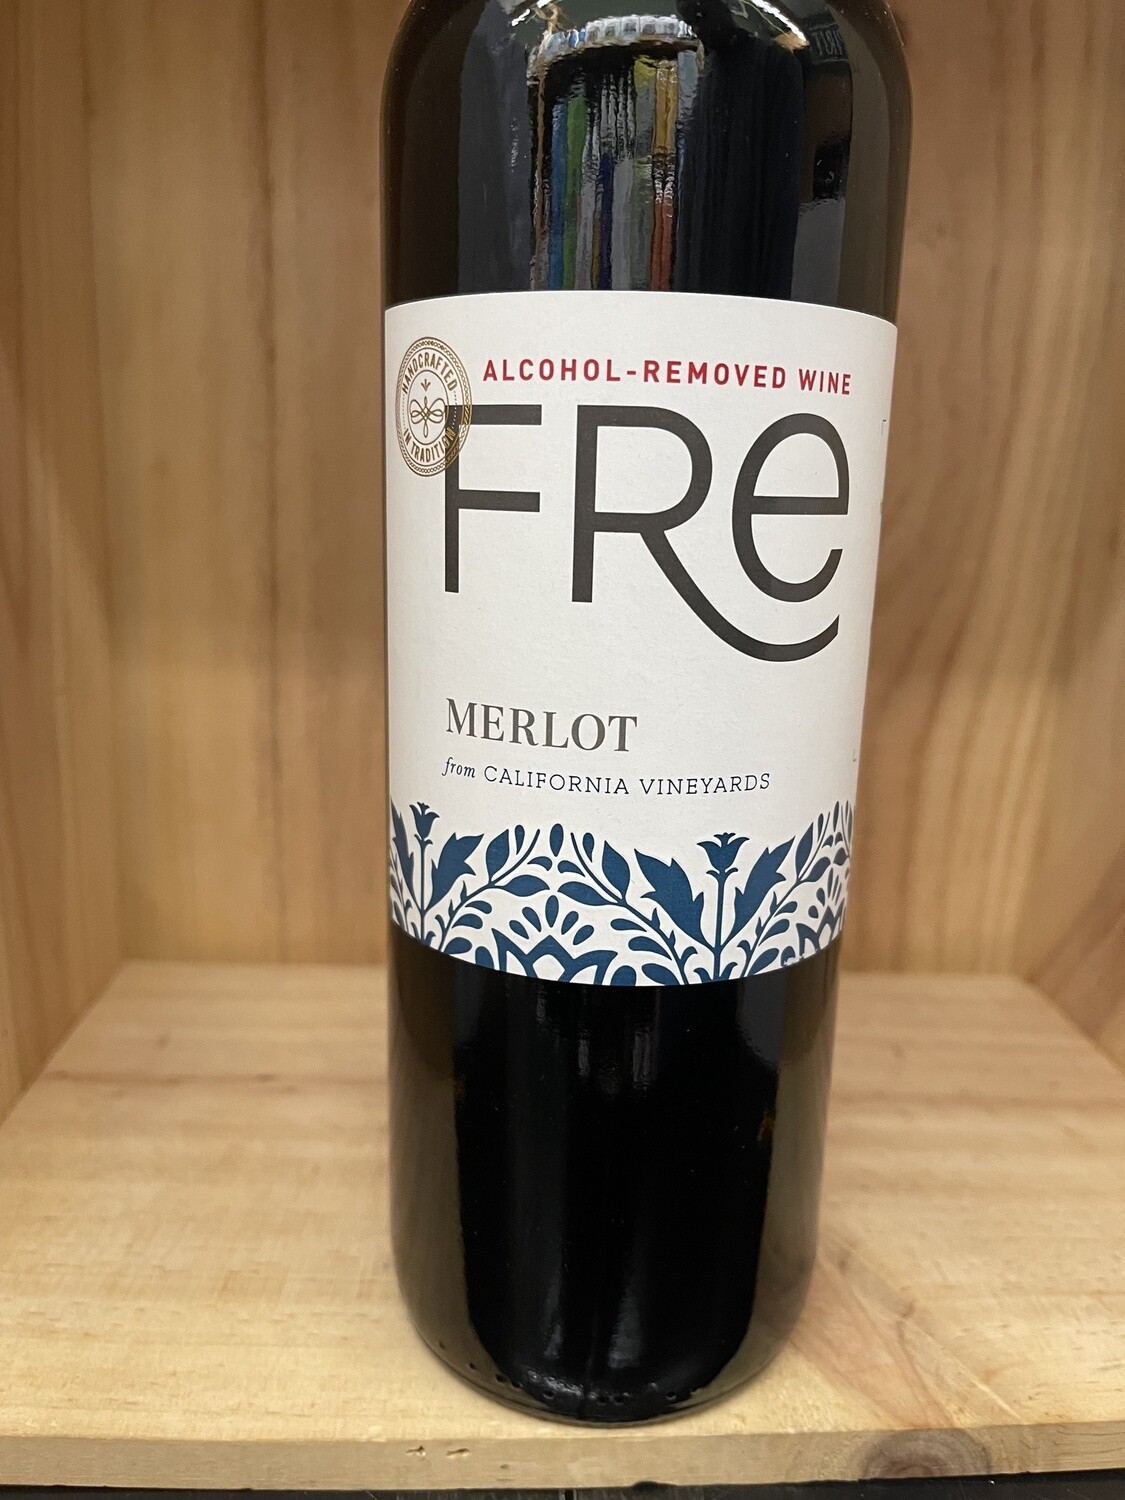 FRE MERLOT (ALCOHOL REMOVED) - 750ML